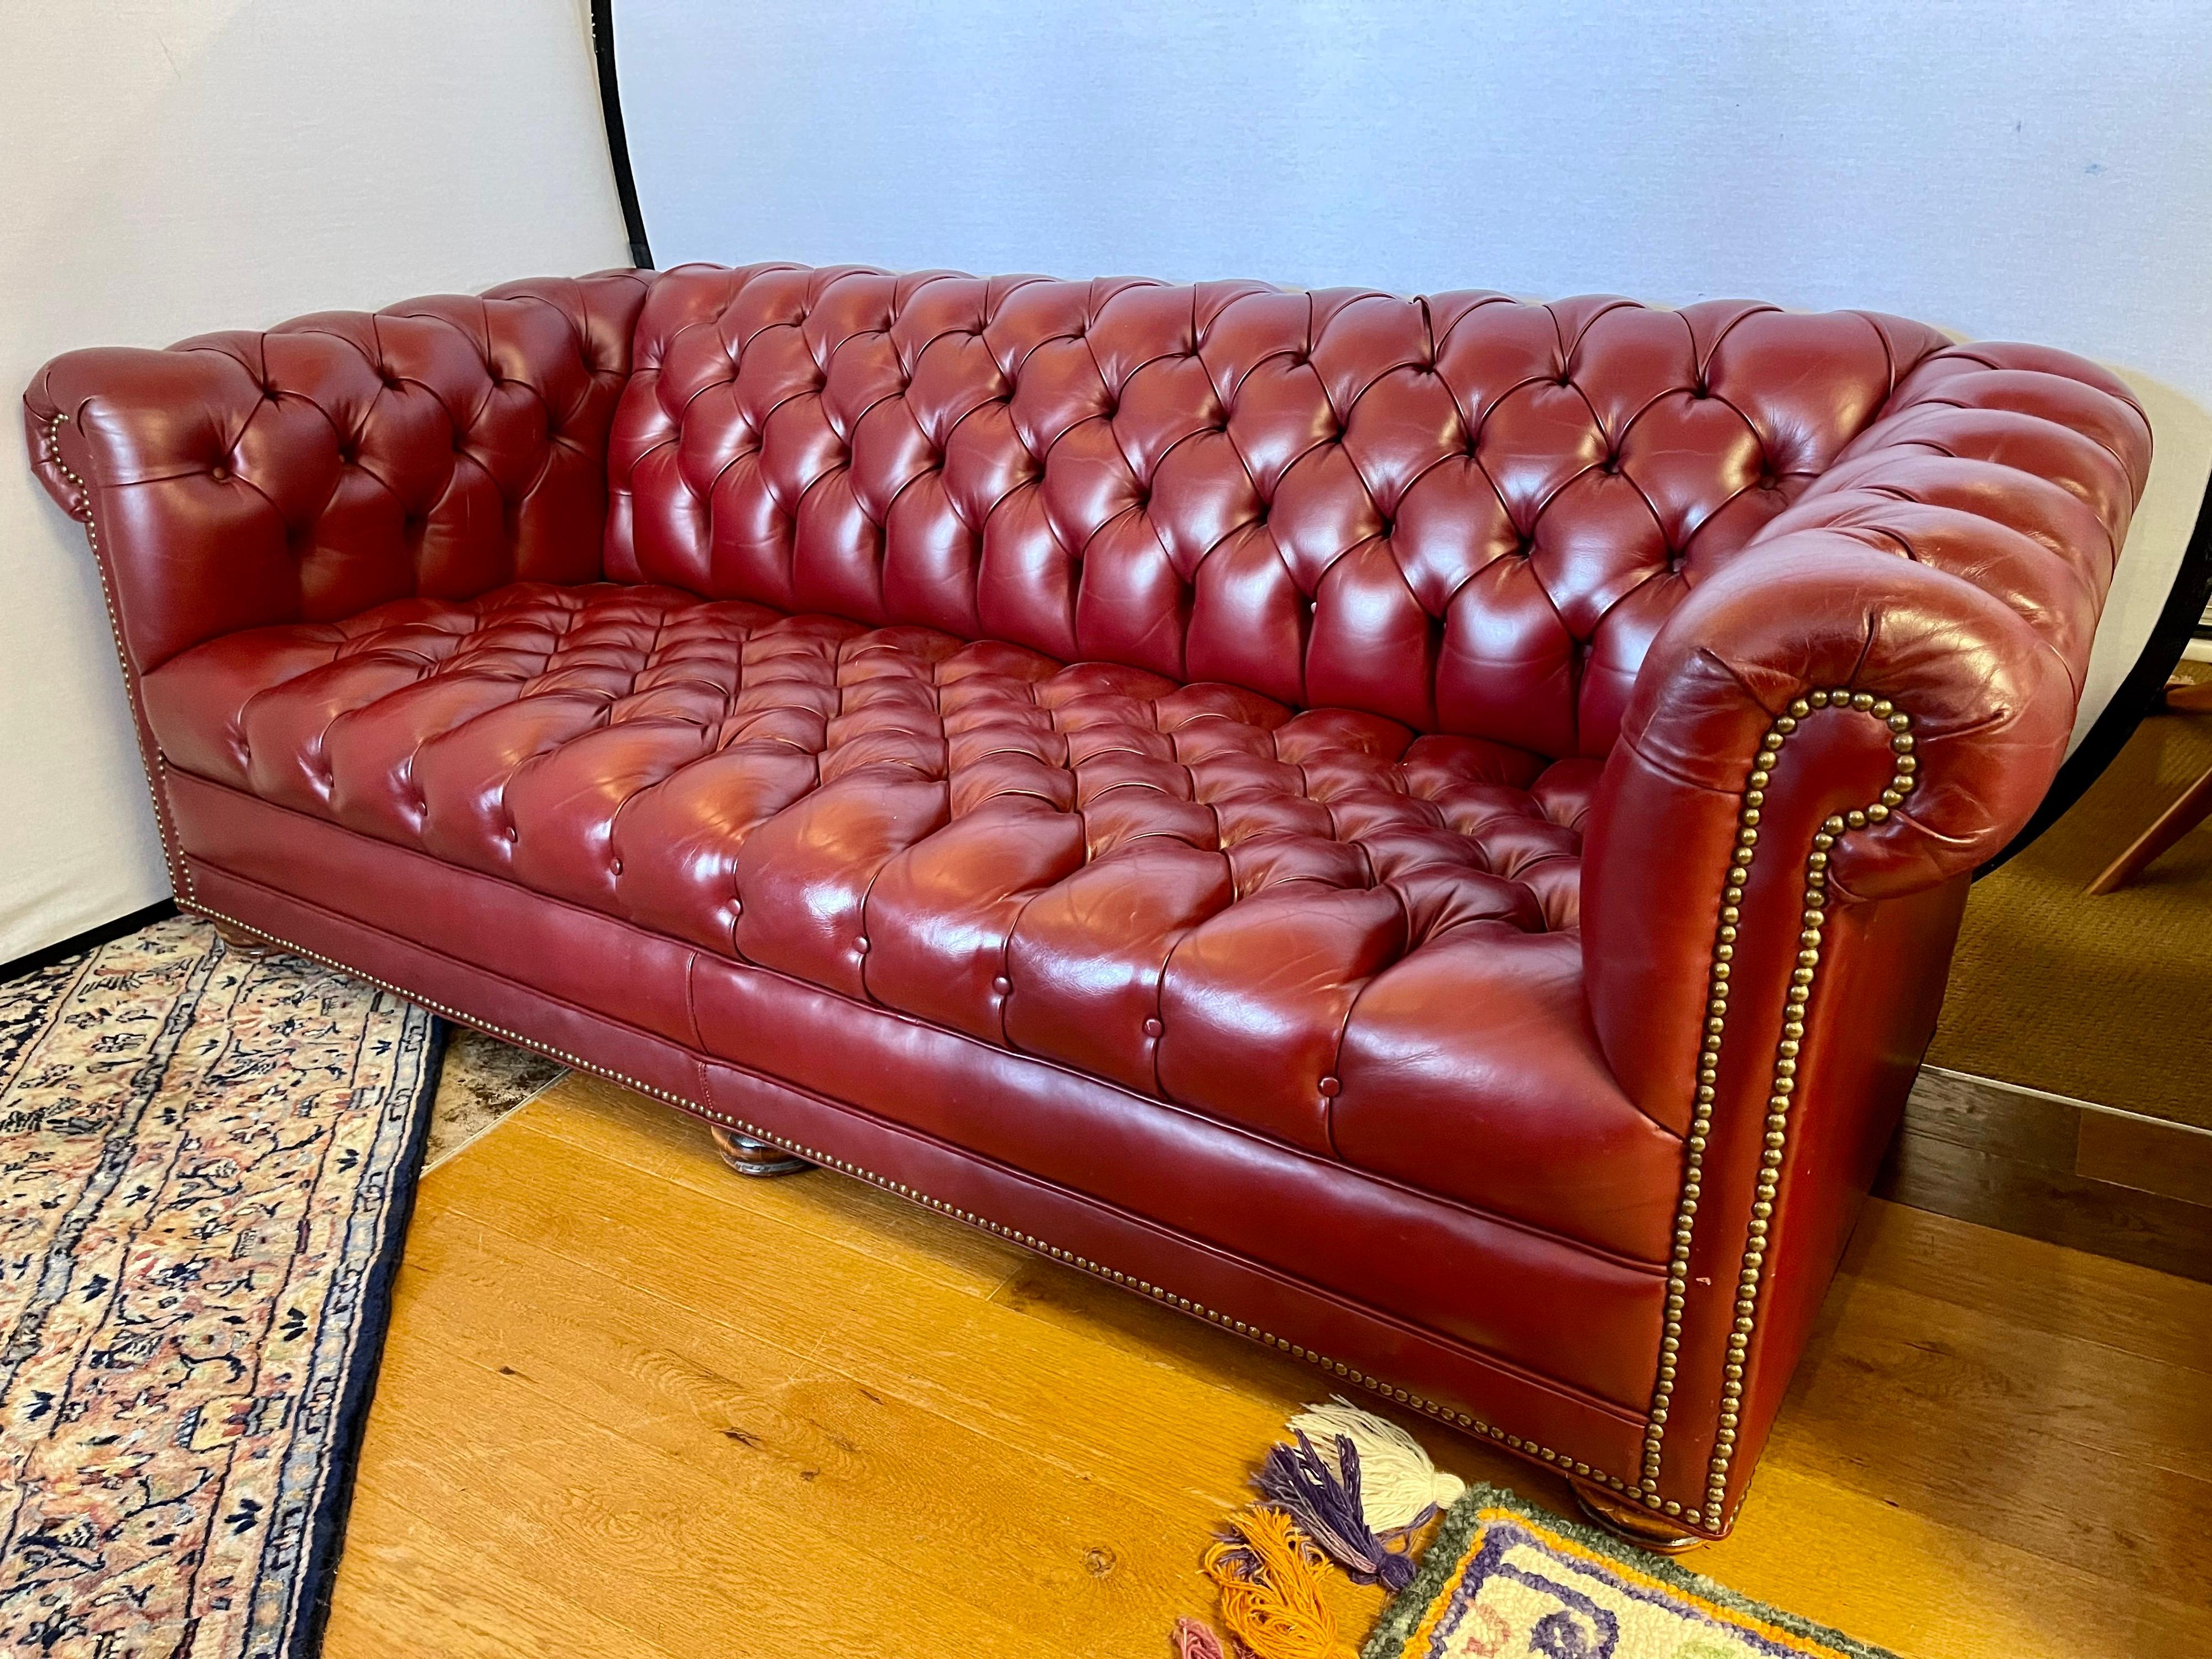 Stunning vintage oxblood burgundy red leather chesterfield sofa with rare button tufting throughout including the seating. All dimensions are below and, unlike many chesterfields, this one sports eight-way hand tied construction so that it is